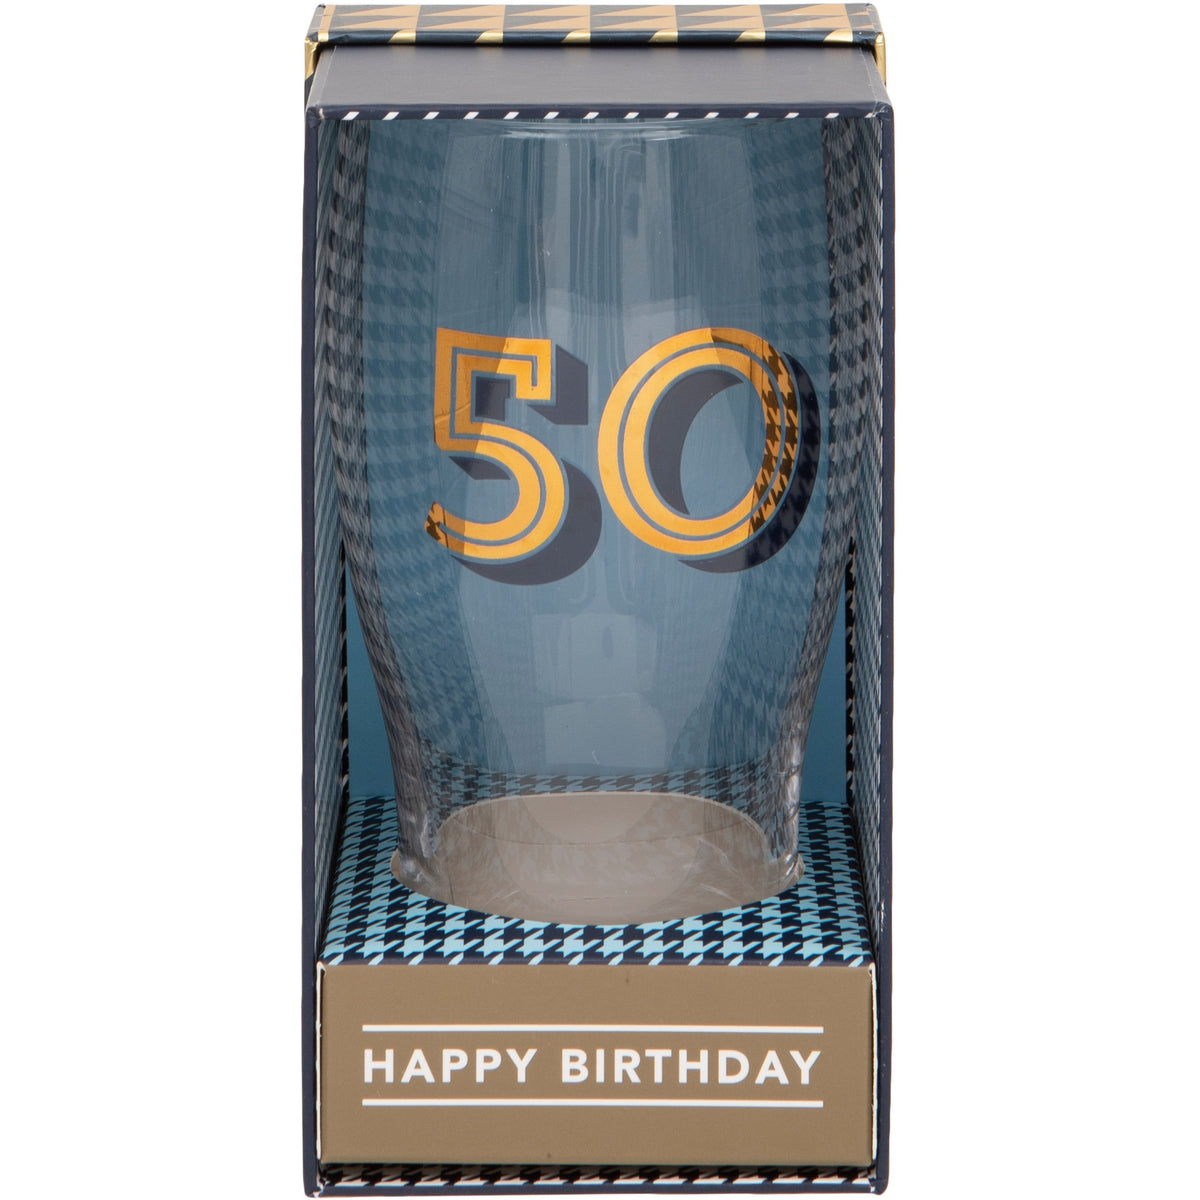 Gold Collection 50th Birthday Beer Glass